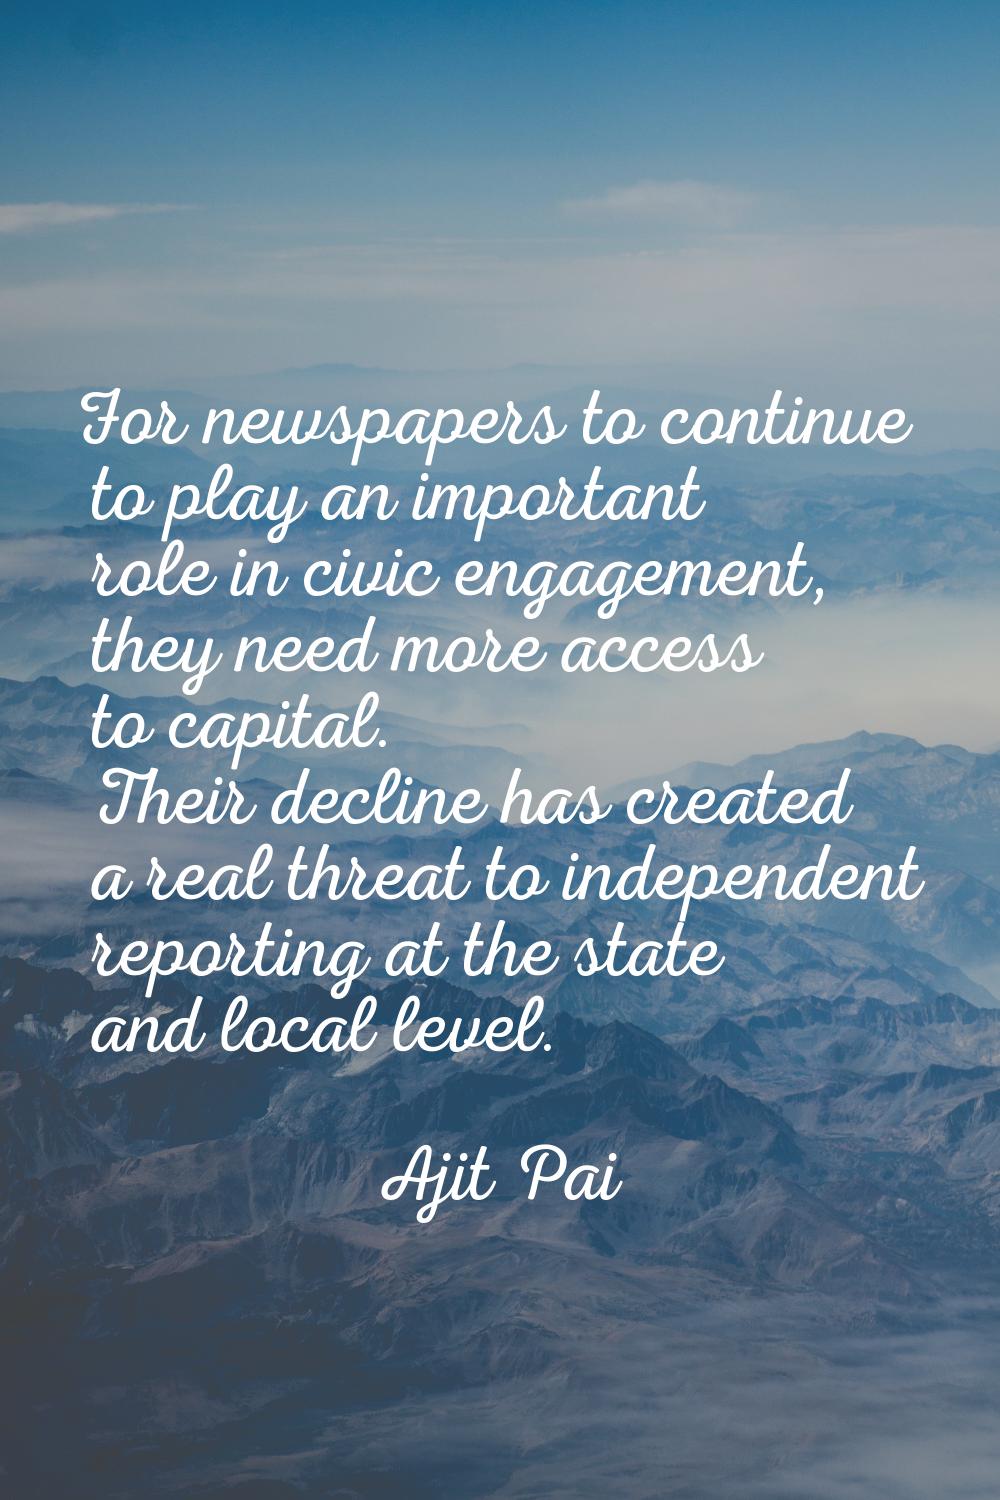 For newspapers to continue to play an important role in civic engagement, they need more access to 